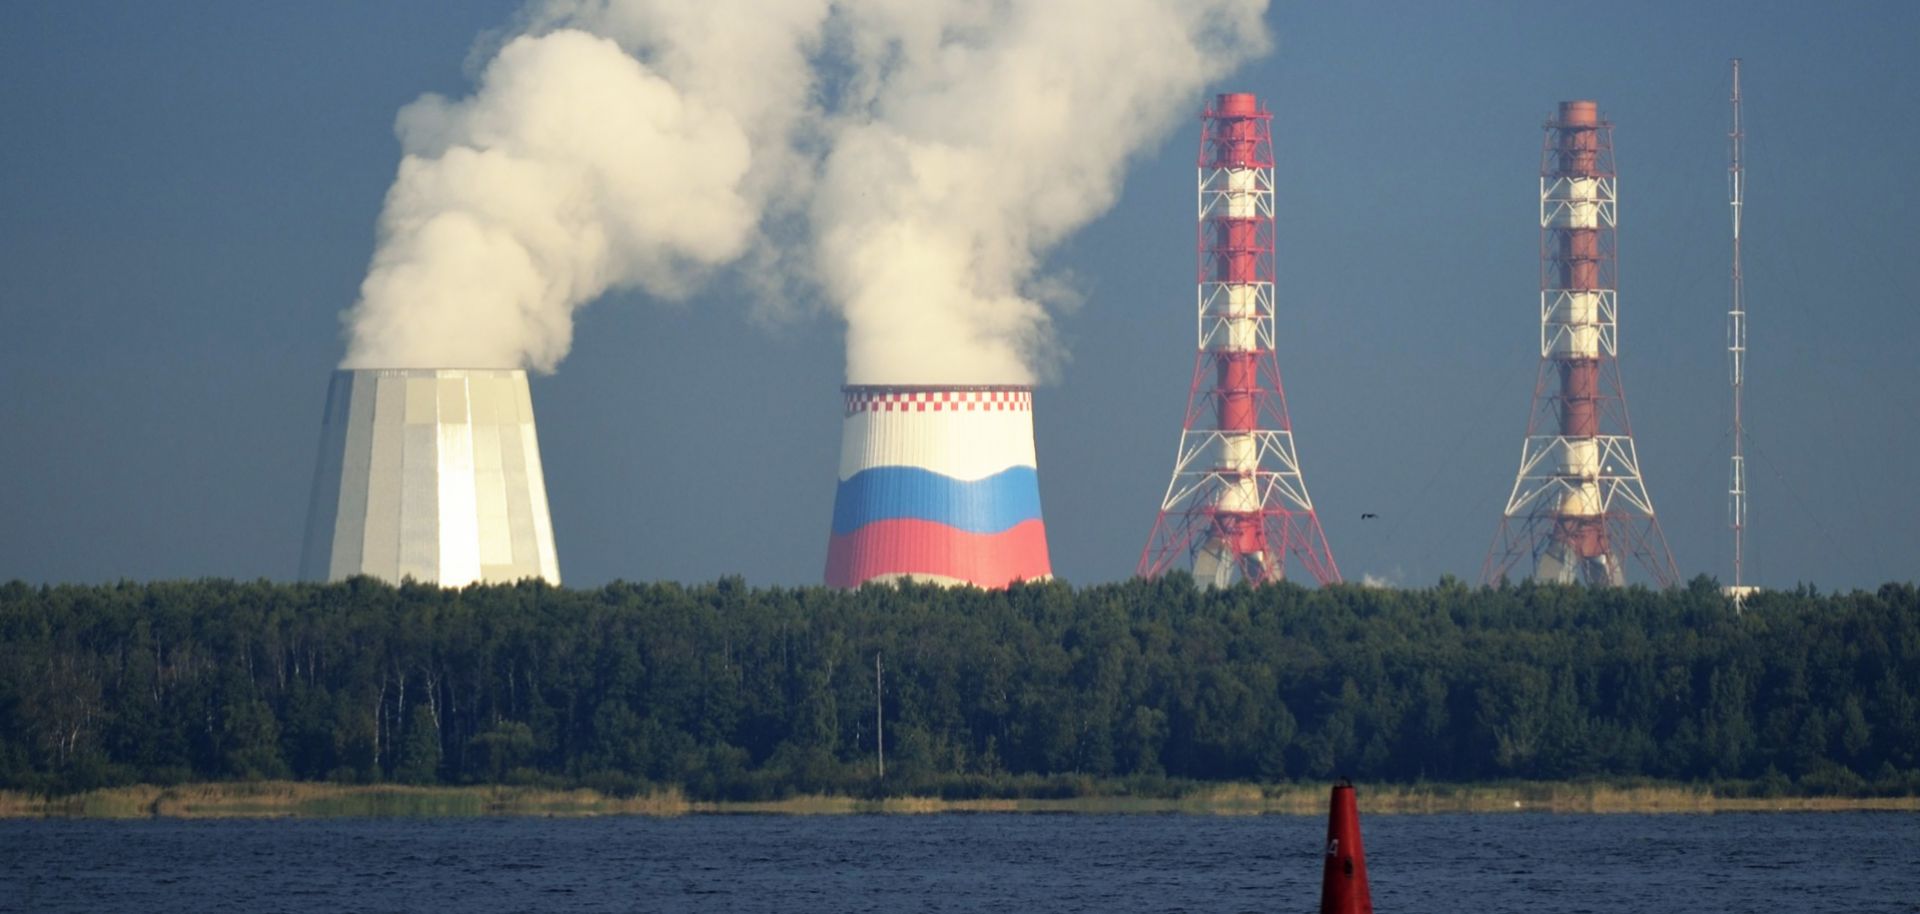 View of a Russian nuclear plant in St. Petersburg.